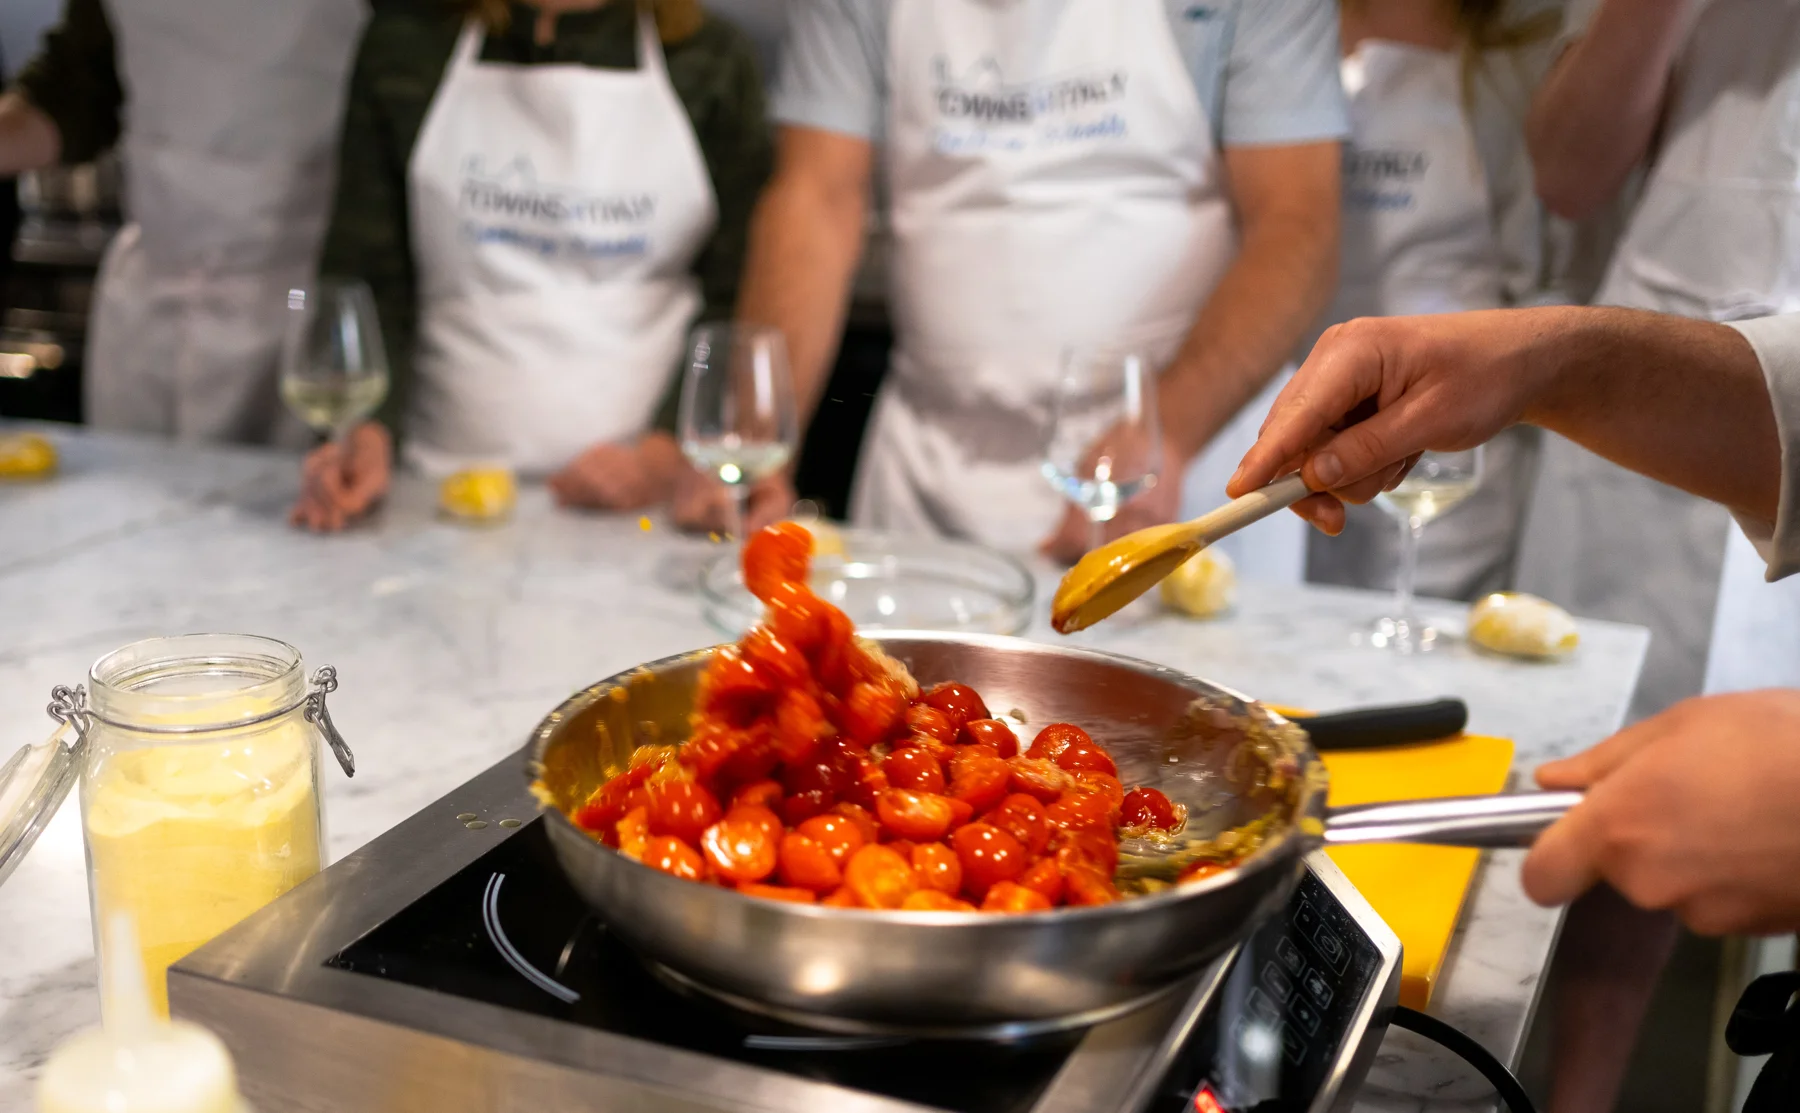 Gelato and pizza making class in downtown Milan - 1519400